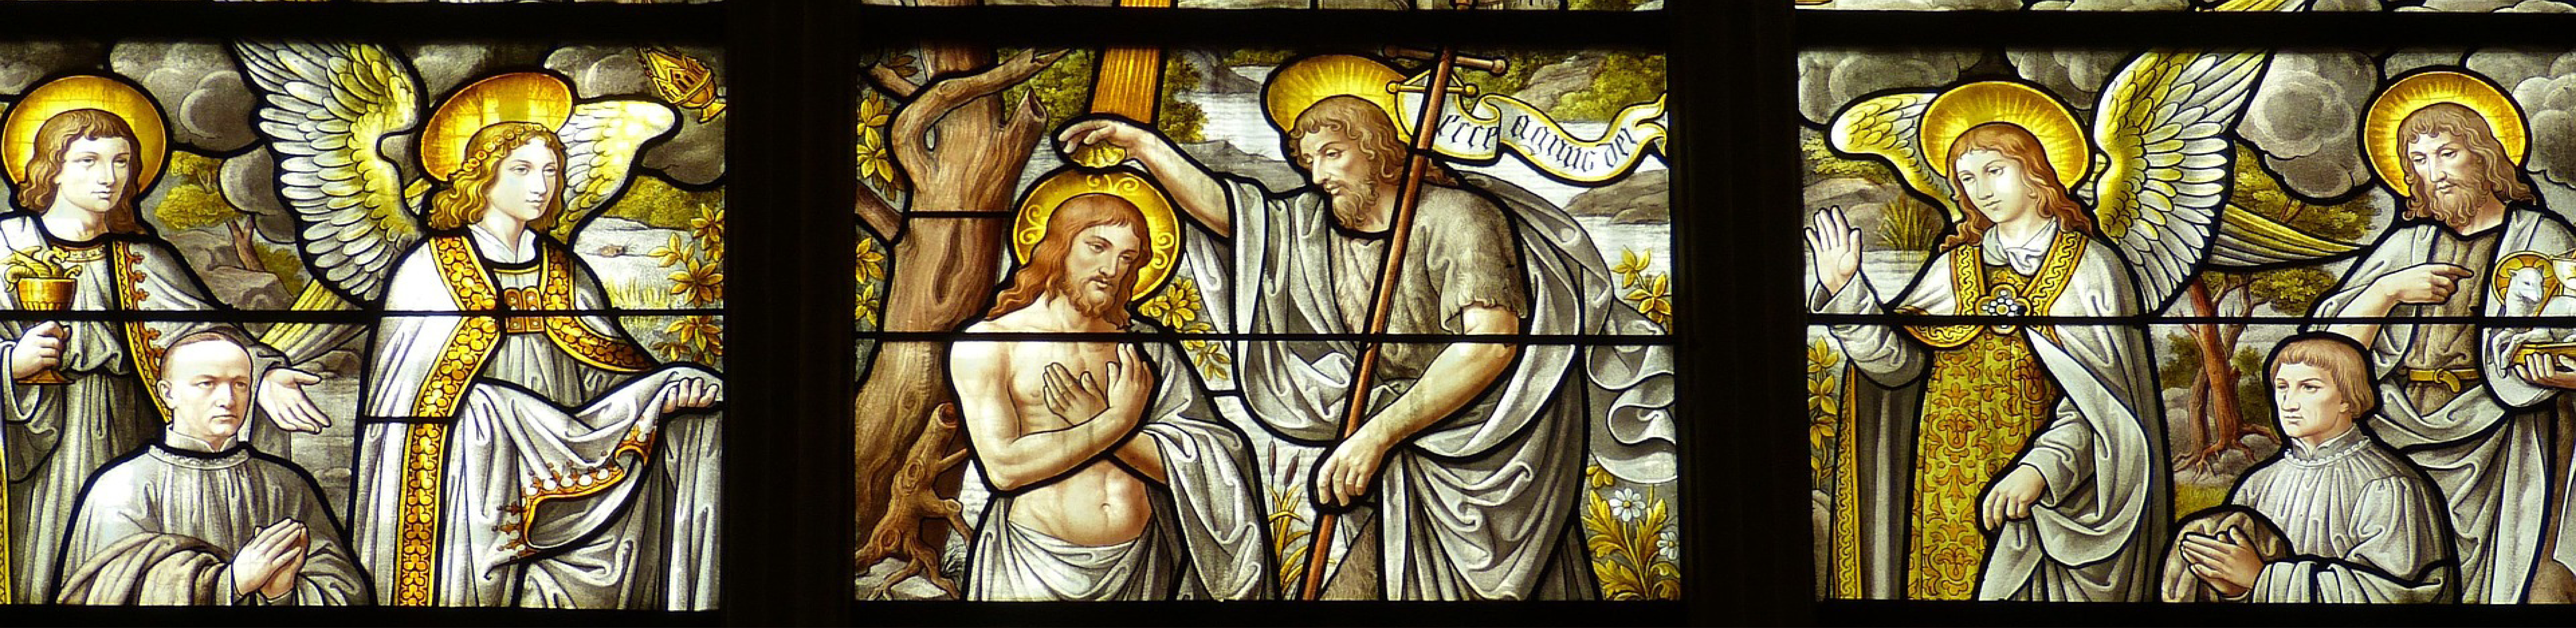 Stained glass window of the Baptism of Jesus